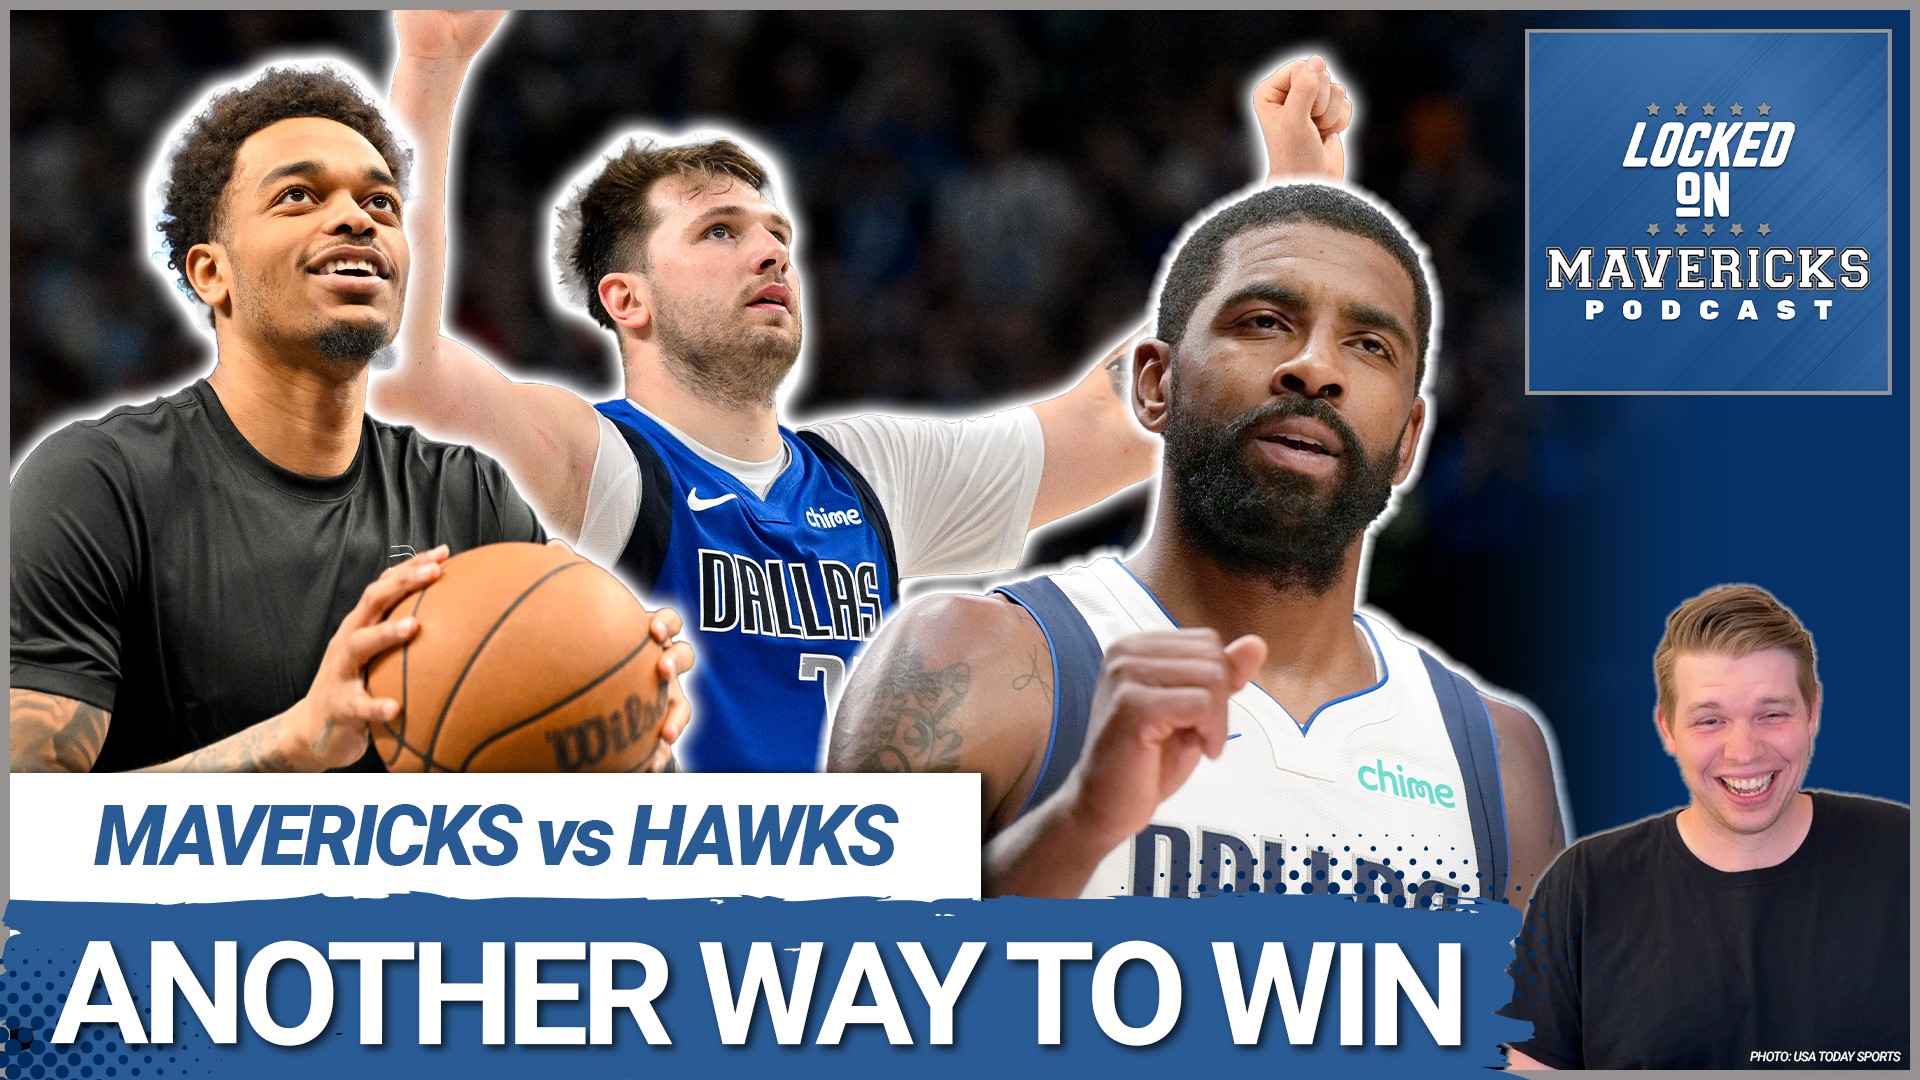 Nick Angstadt explains how the Dallas Mavericks found another way to win a game, how Luka Doncic & Kyrie Irving controlled the game, and how the Mavs beat the Hawks.